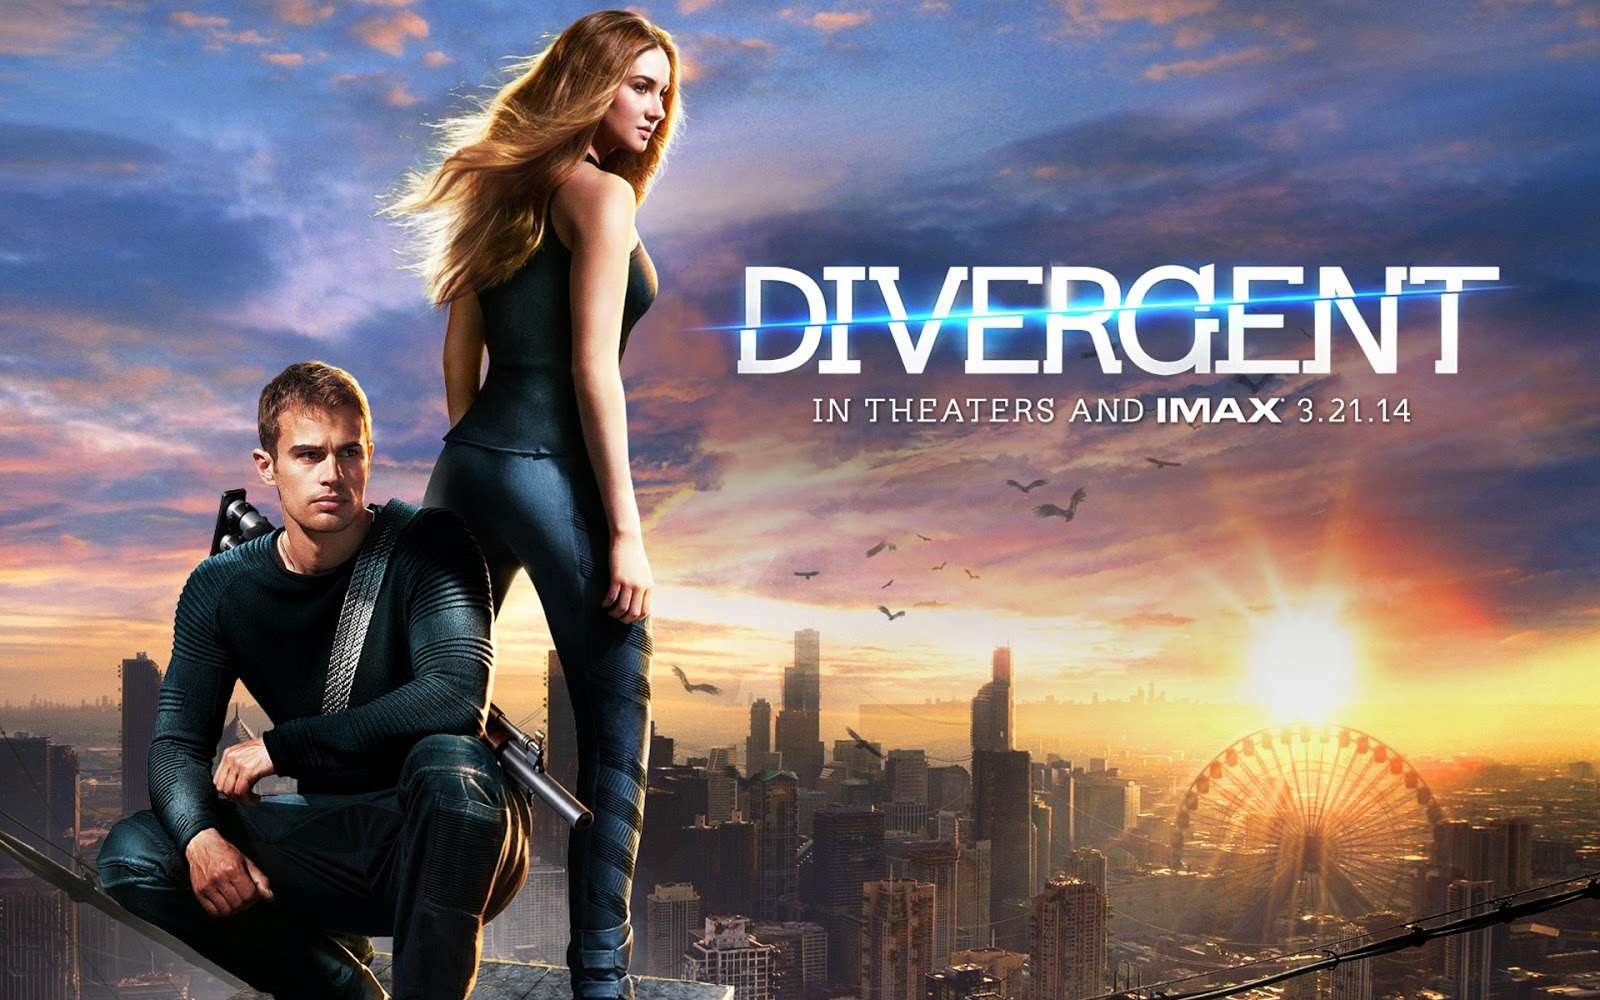 ‘Divergent’ Overview (with GIF’s!)